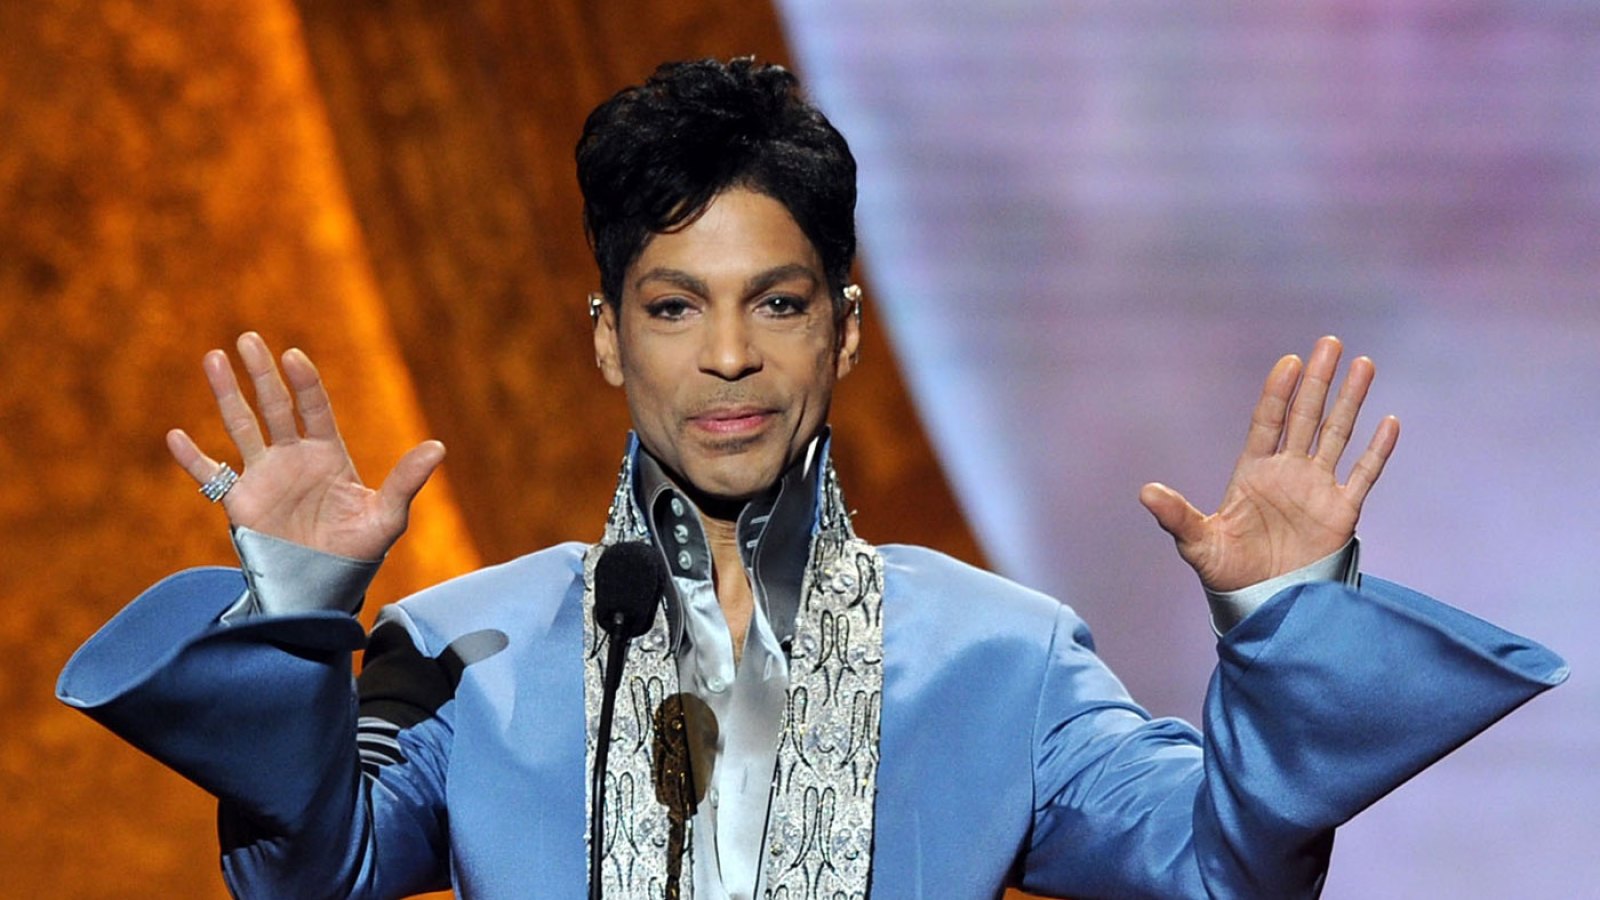 Prince had an appointment with an addiction doctor, according to a report